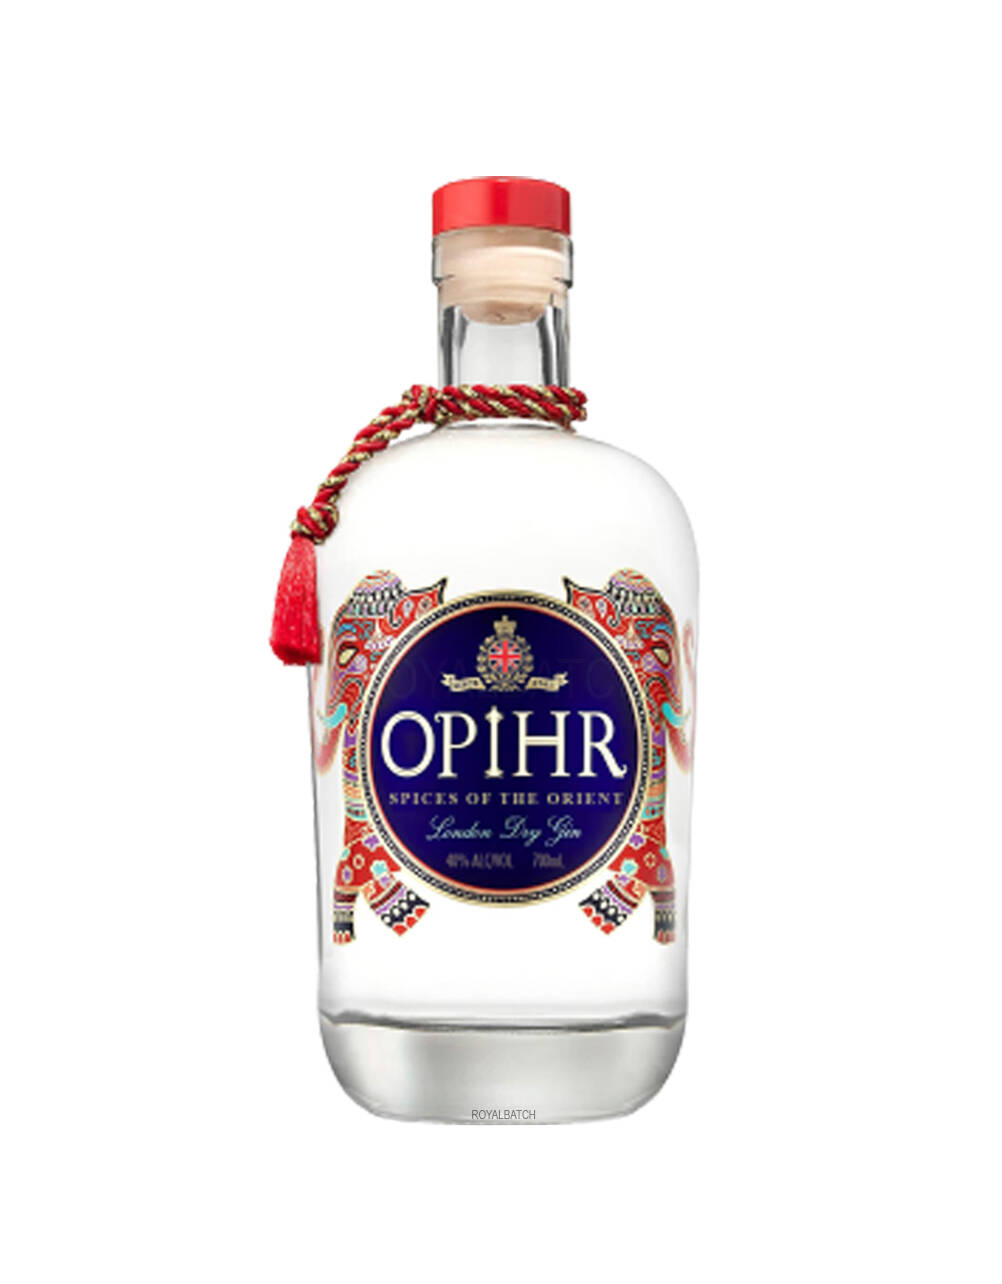 Opihr Spices Of The Orient London Dry Gin